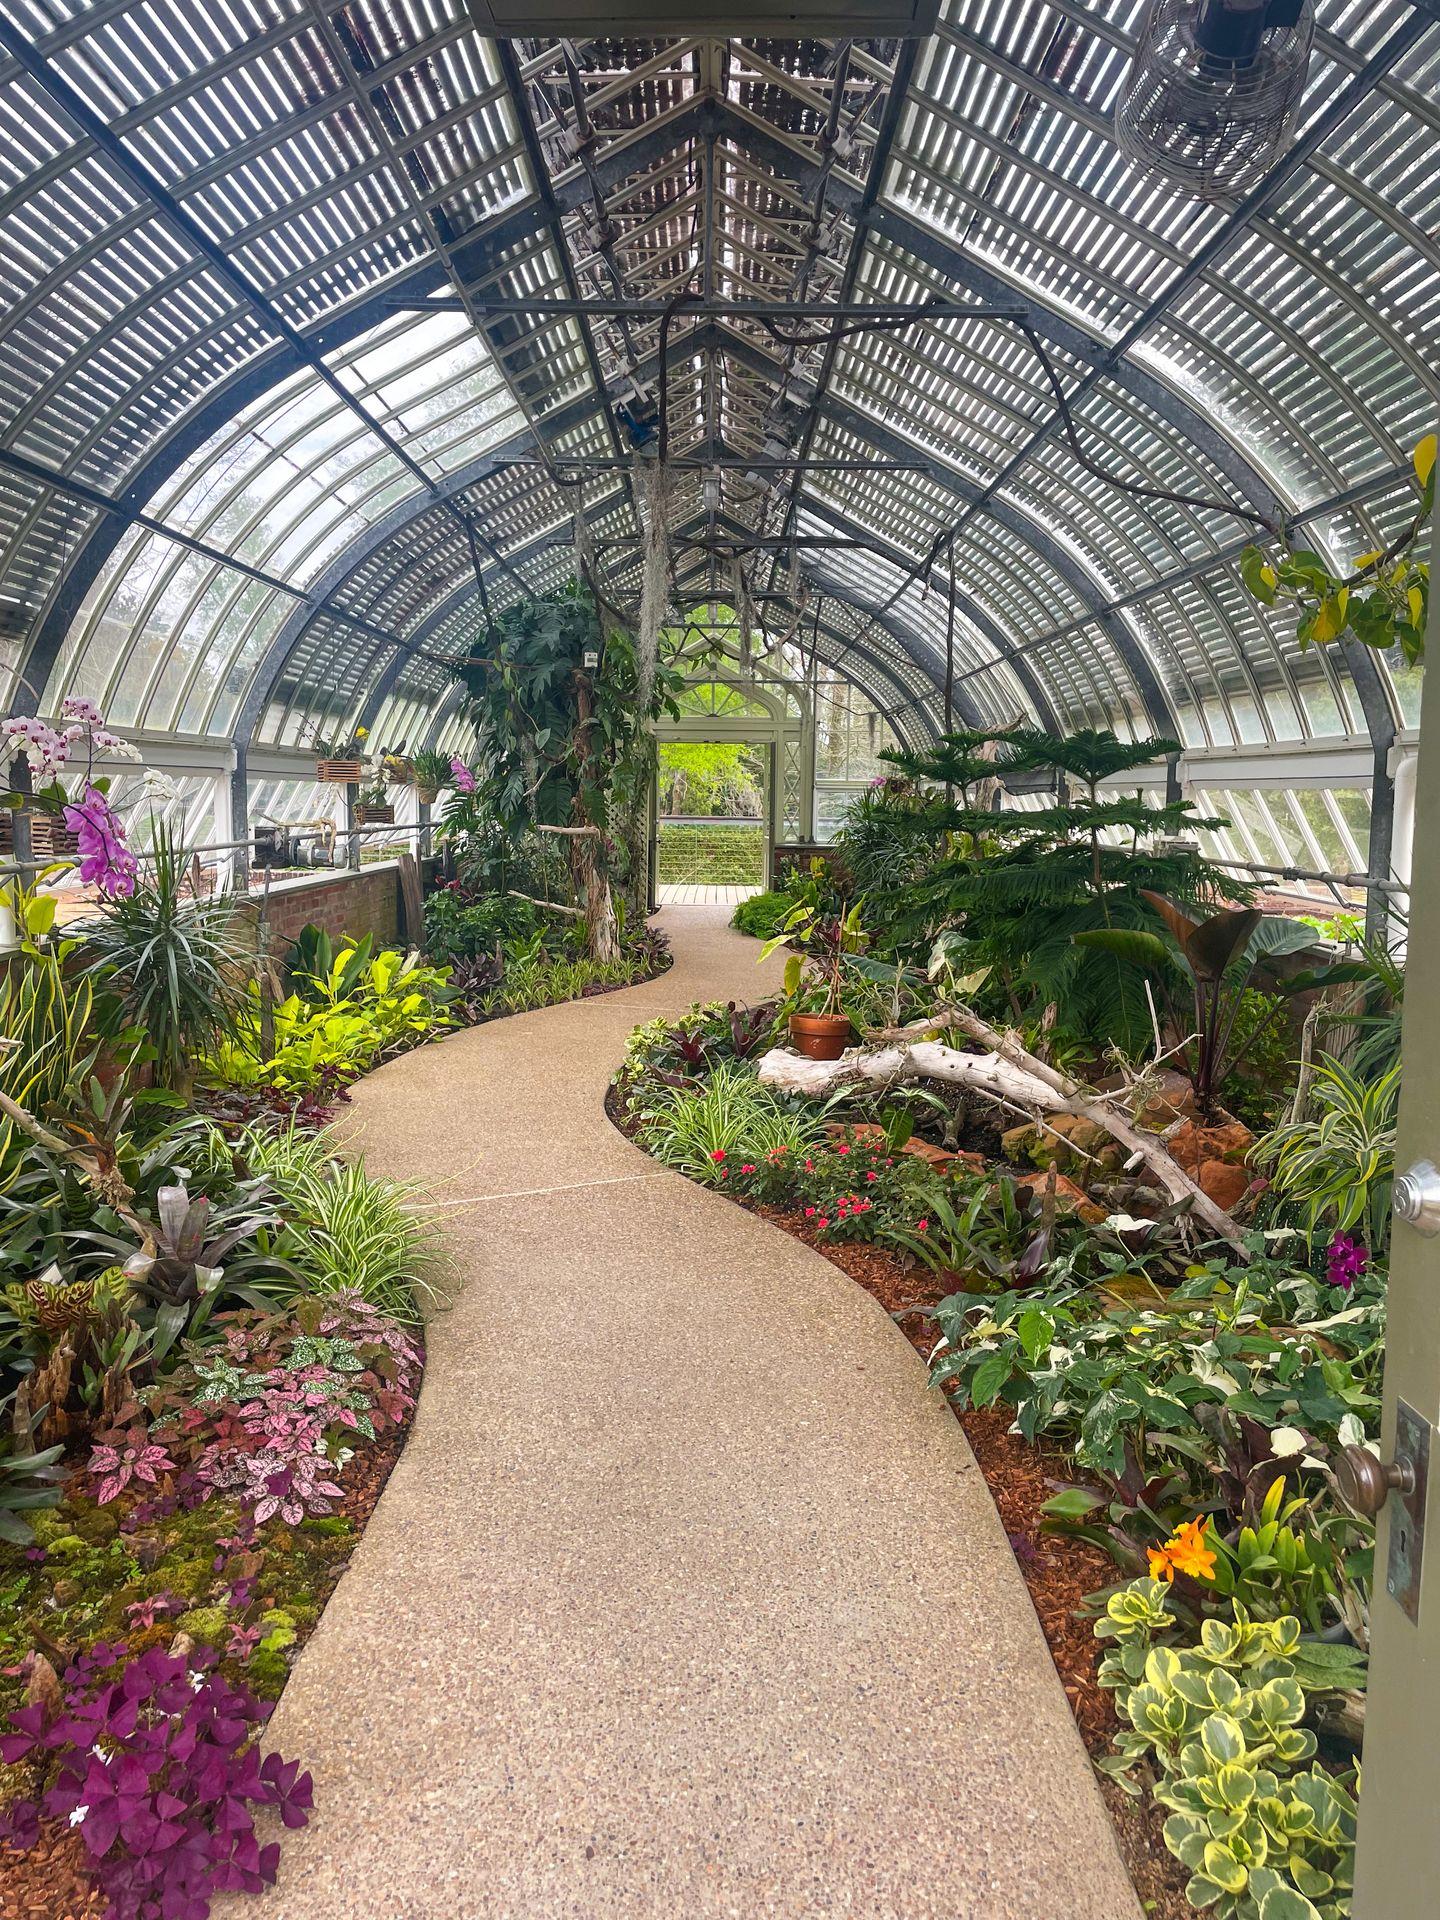 A pathway surrounded by flowers and greenery inside of a greenhouse at the Shangri La Botanical Gardens